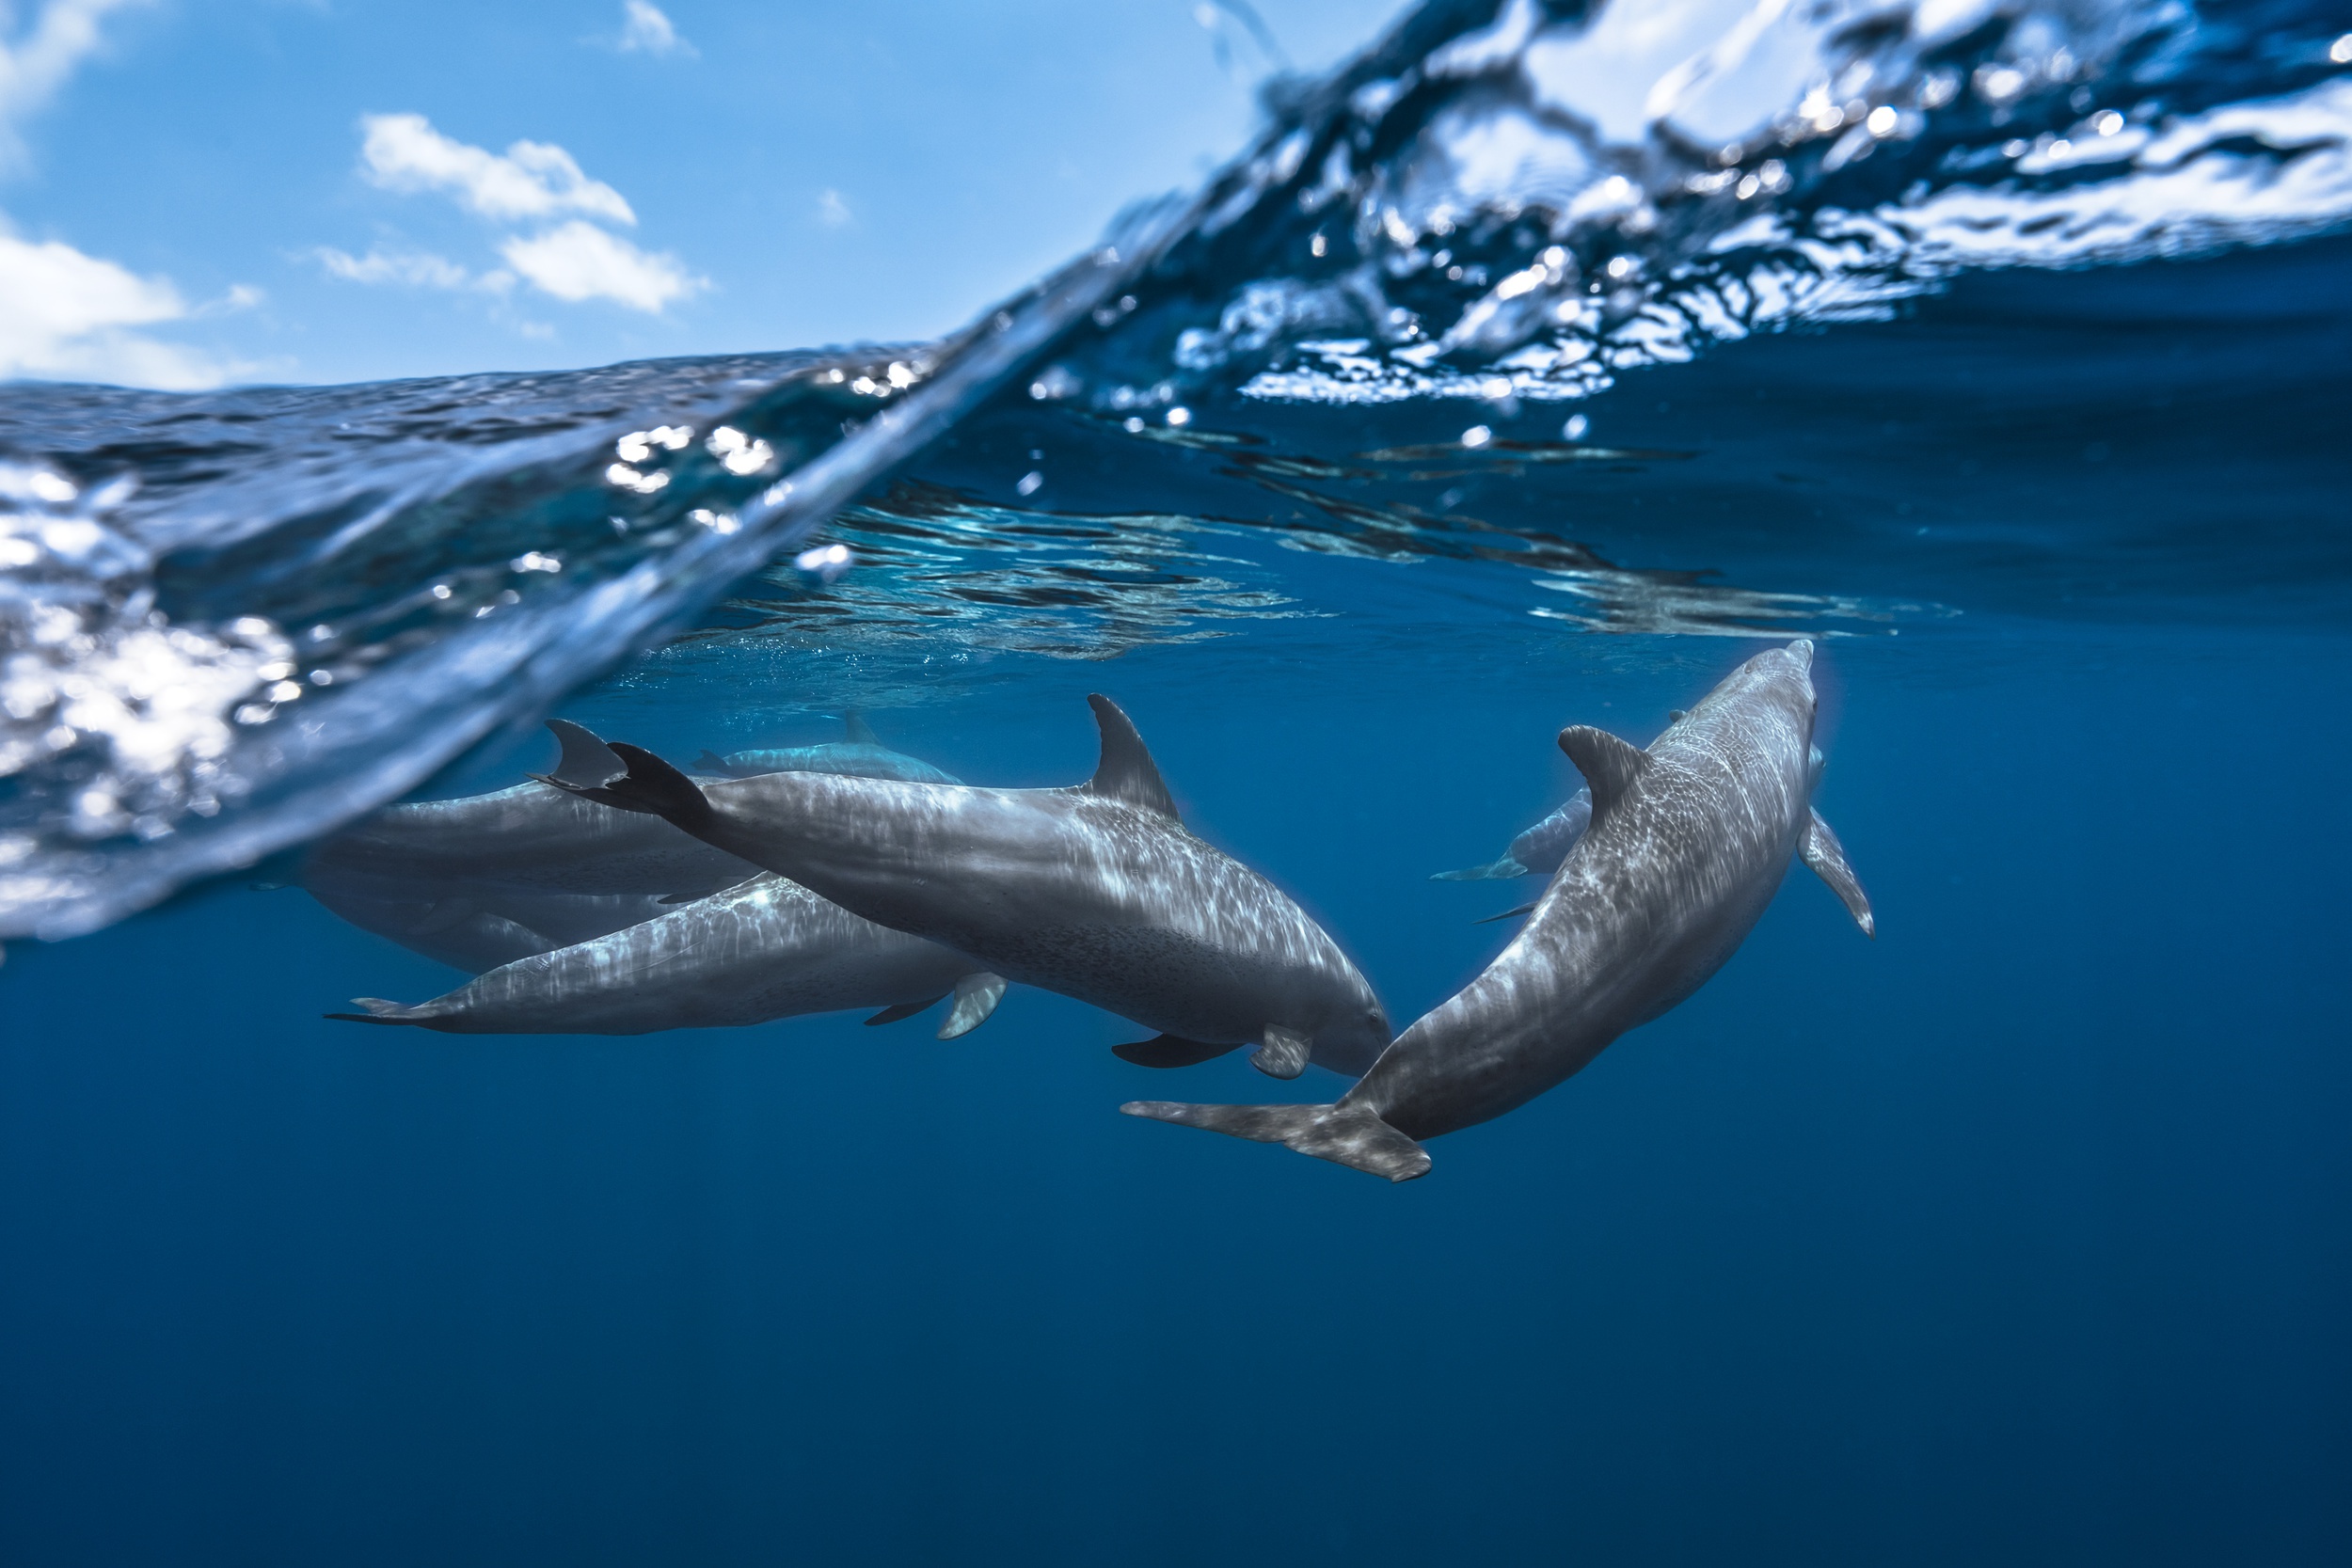 210+ Dolphin HD Wallpapers and Backgrounds